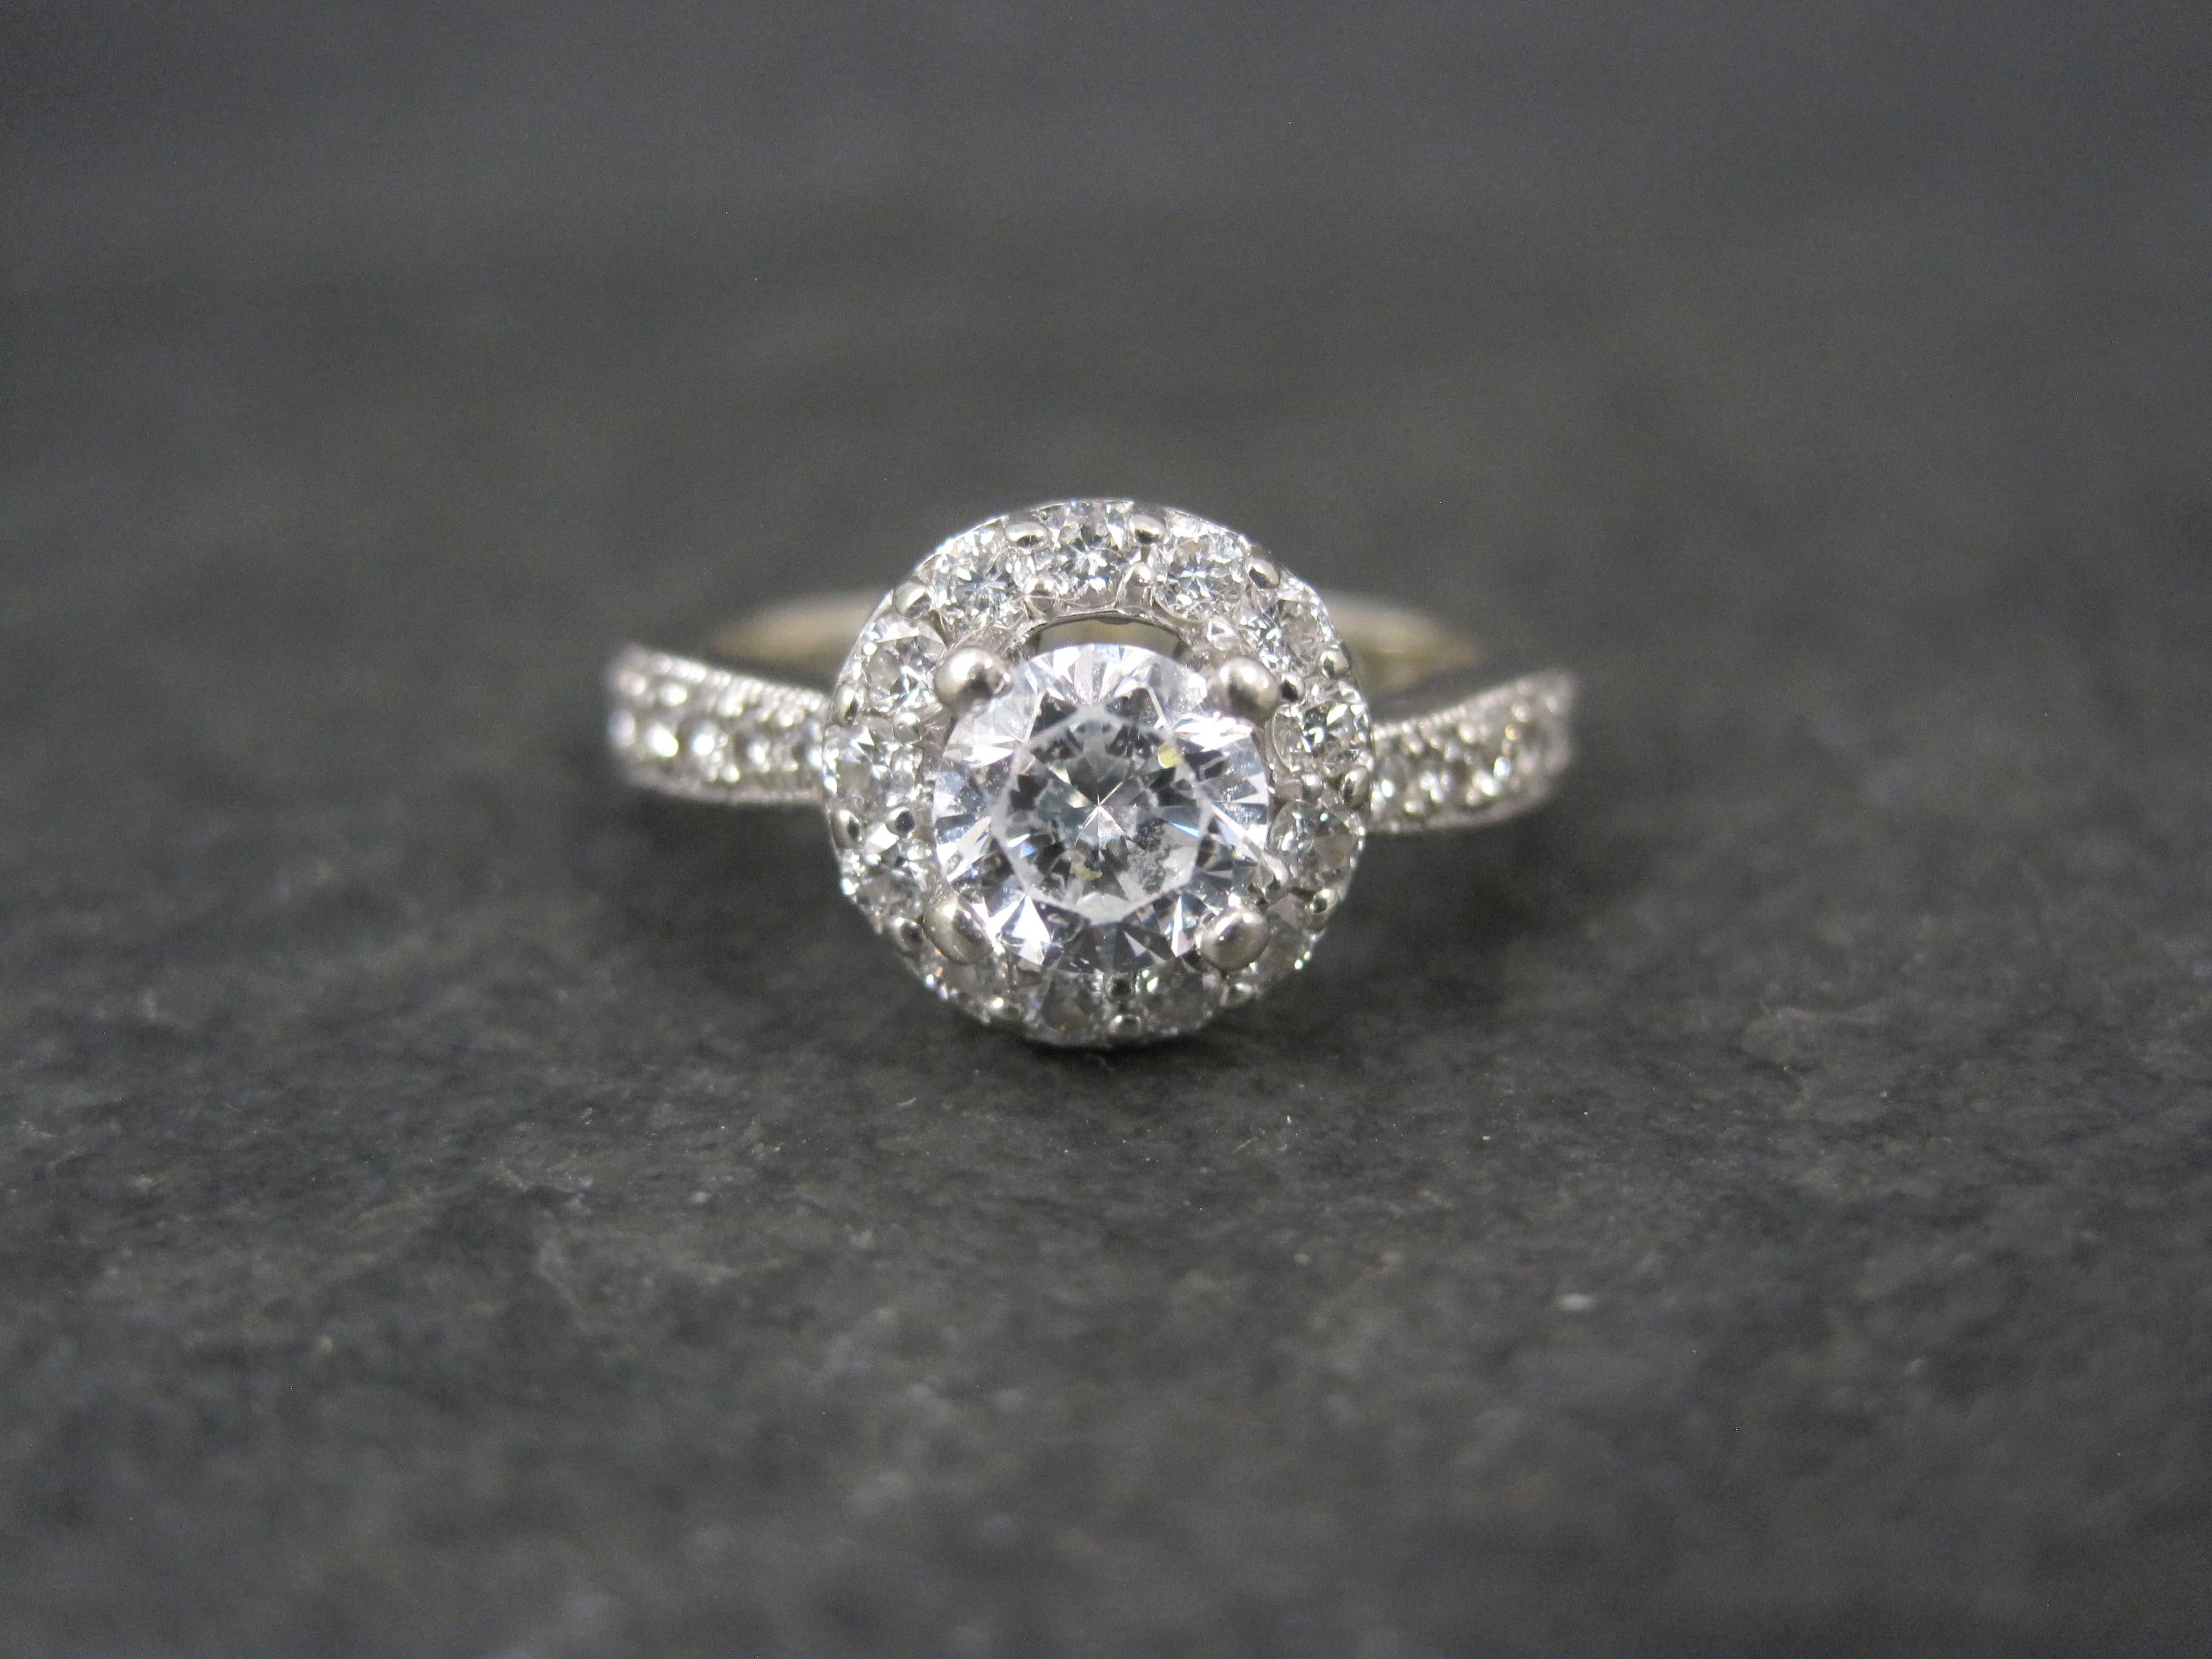 This beautiful engagement ring is 14k white gold.
The semi mount is a product of Finelli.

The center stone is a 5mm cubic zirconia.
The halo and side stones are 1/3 ctw in natural round brilliant cut diamonds estimated to be G to H in color and VS